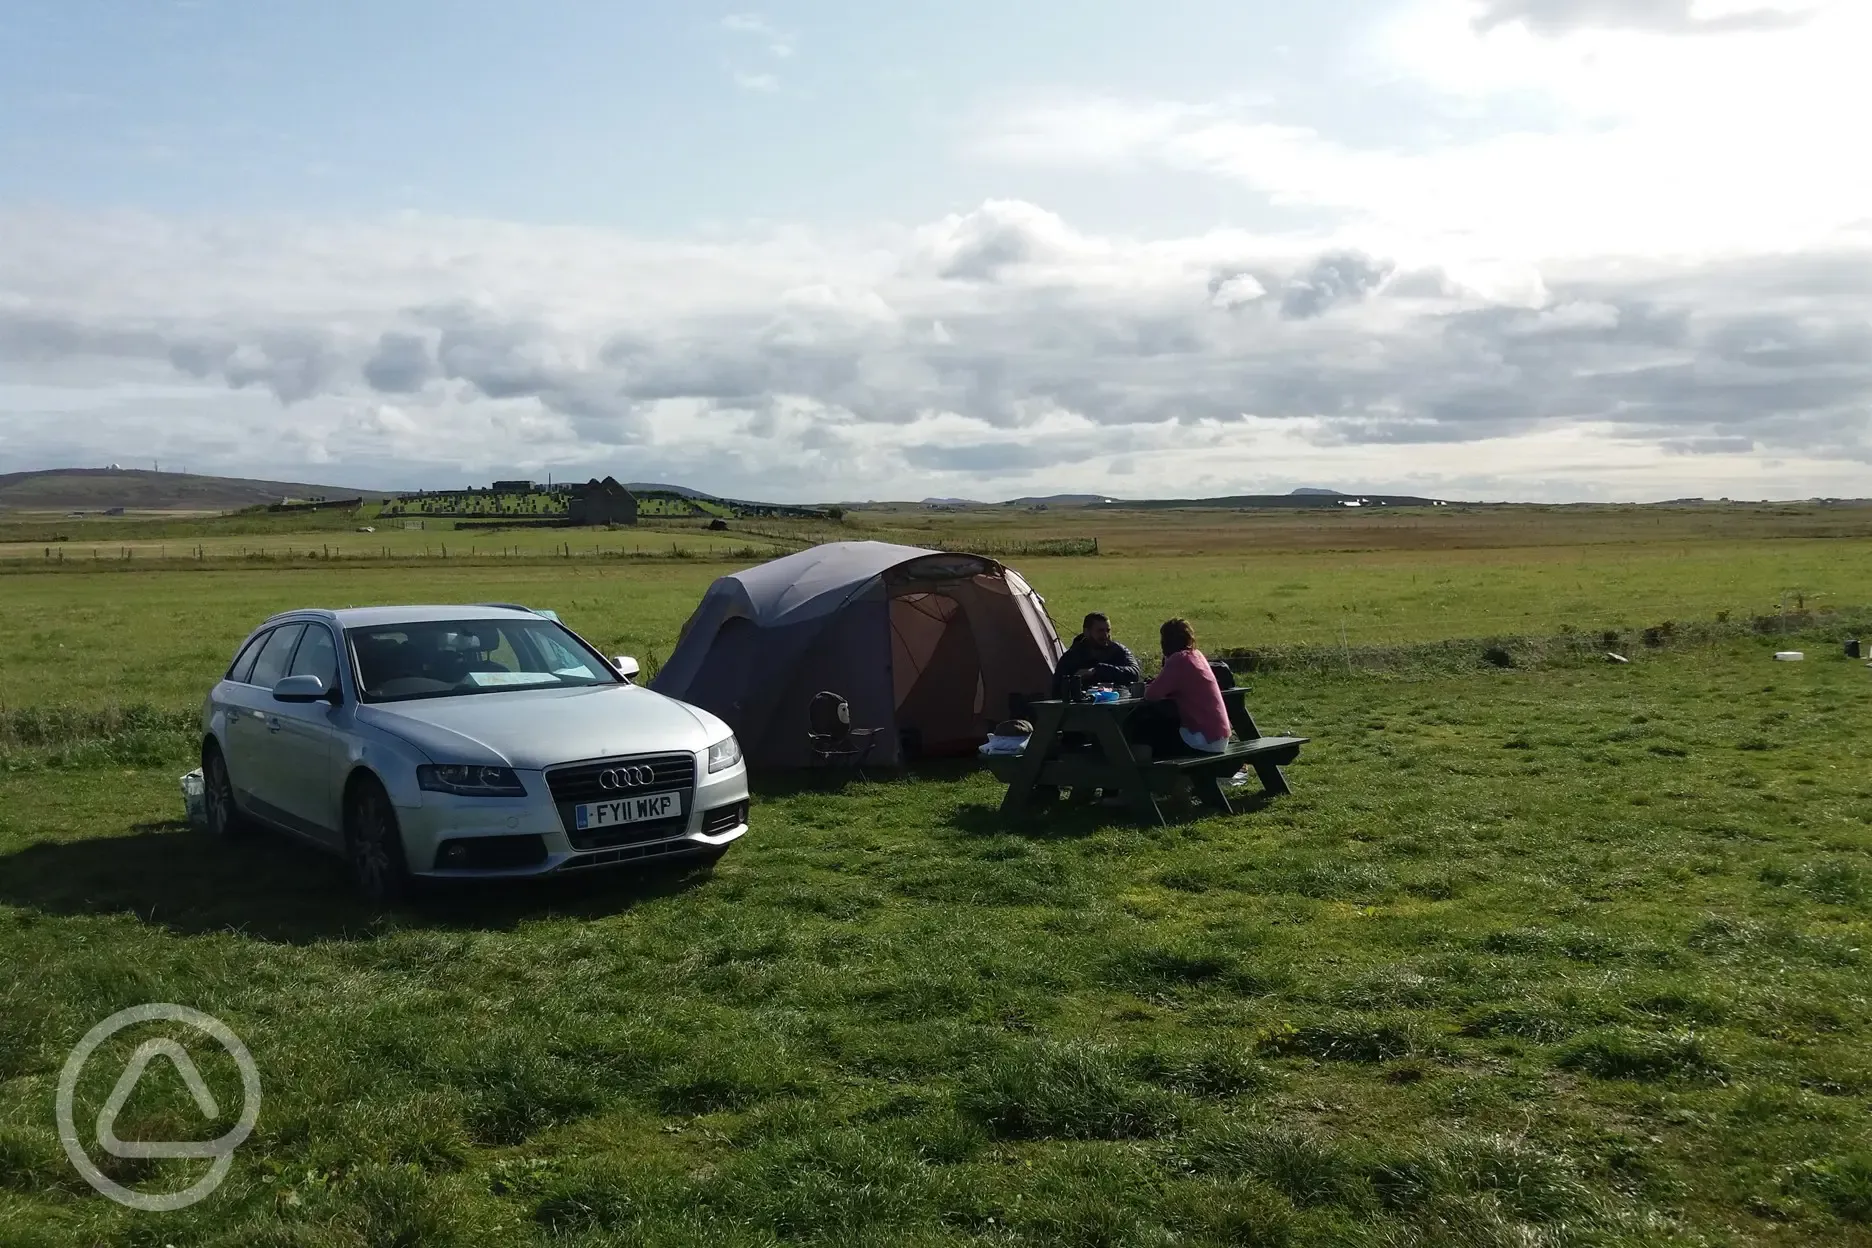 Grass pitches for tents and campervans